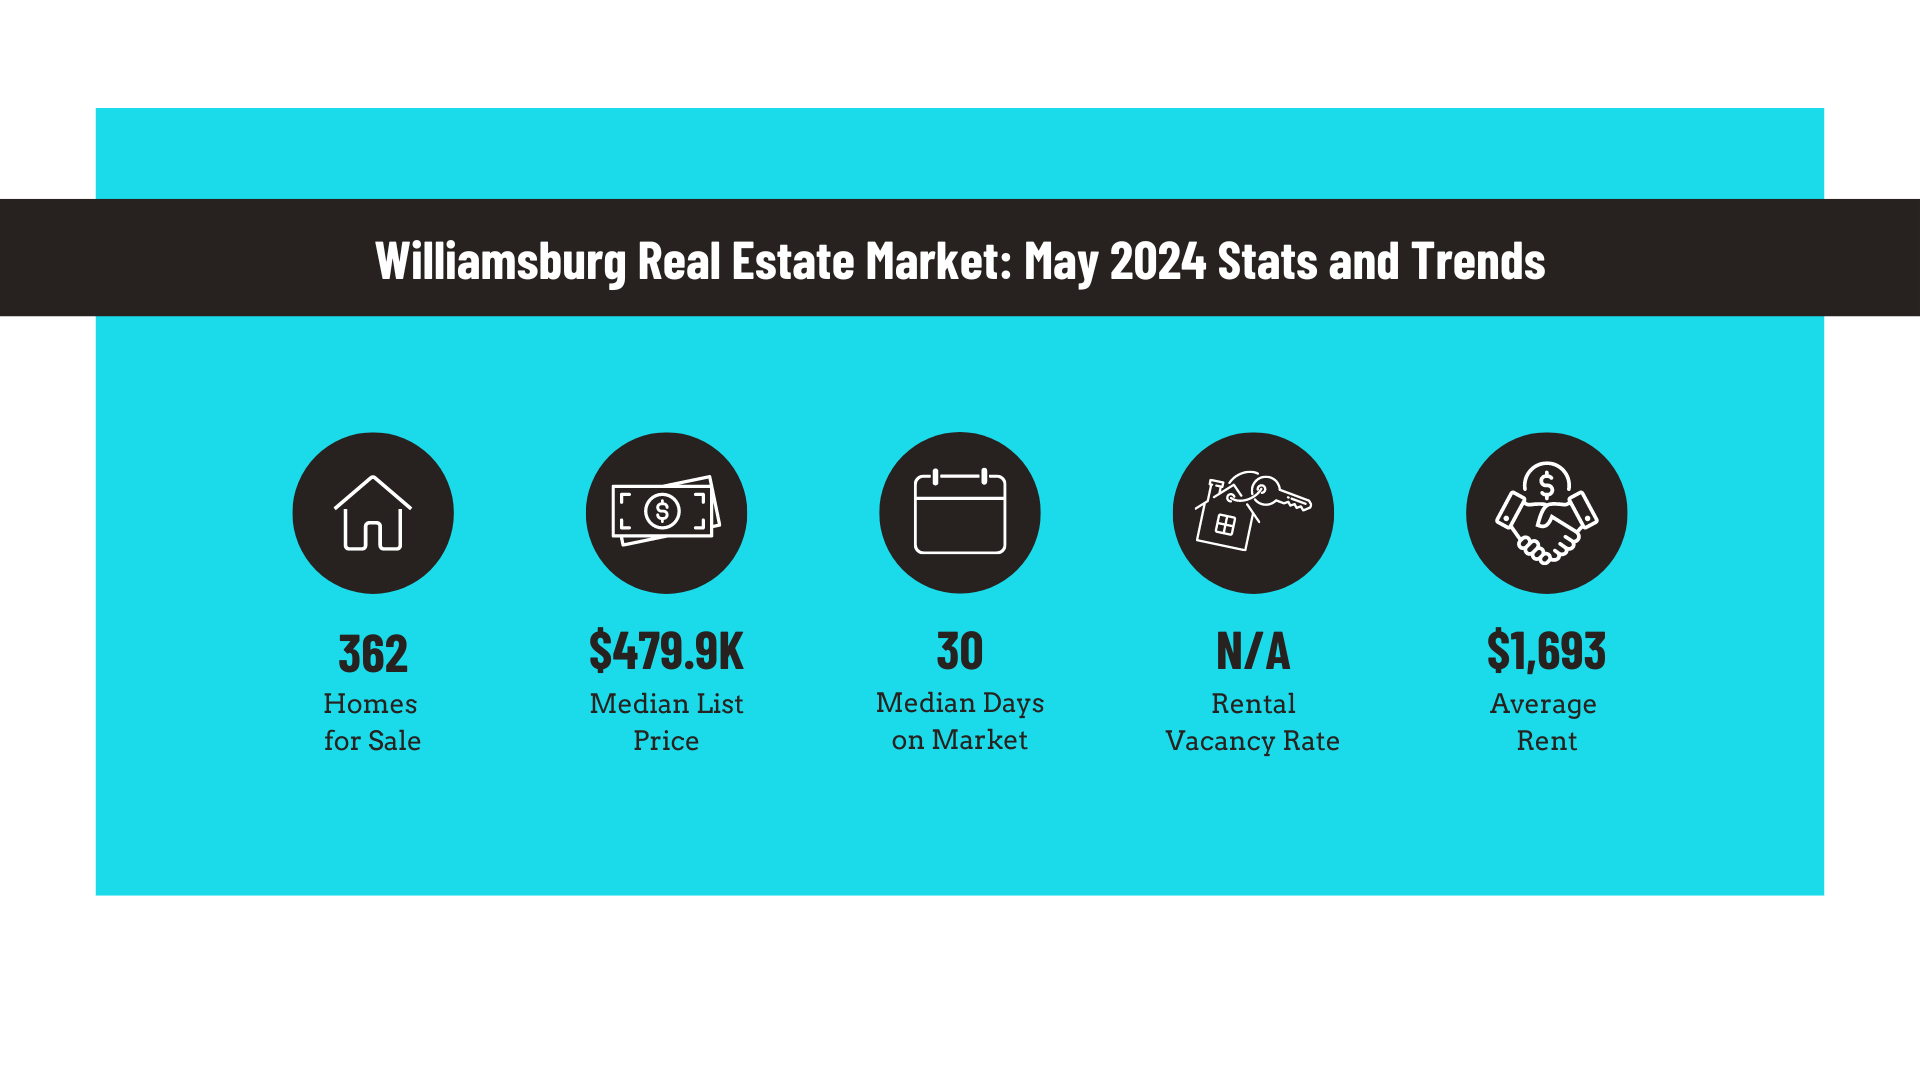 Williamsburg Real Estate Market: May 2024 Stats and Trends